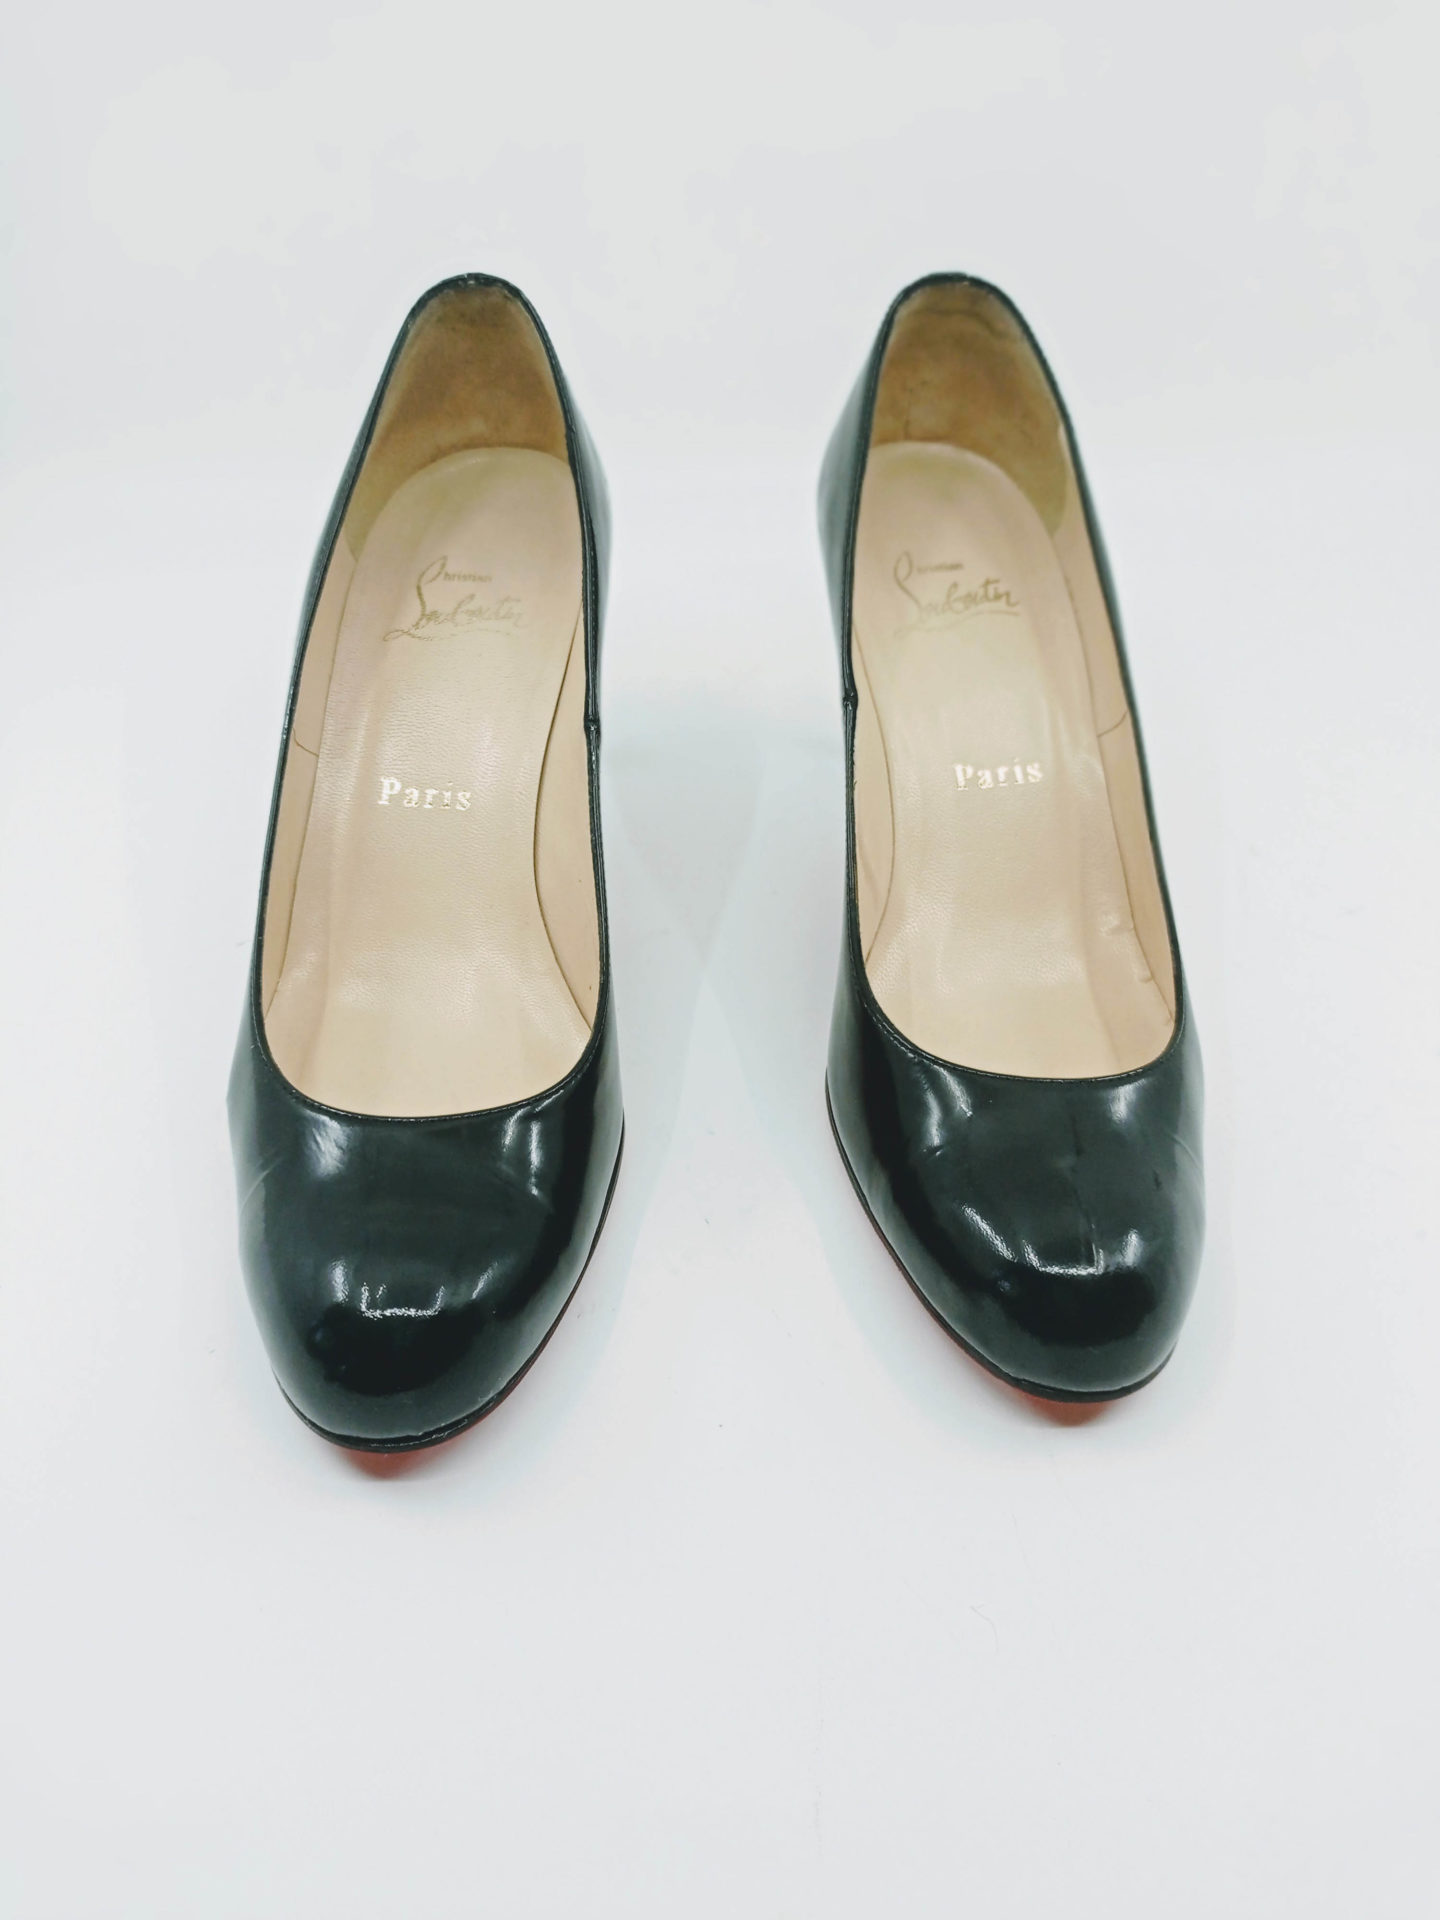 Classic black pumps with famous red soles Christian Louboutin size 38 - AtelierFH